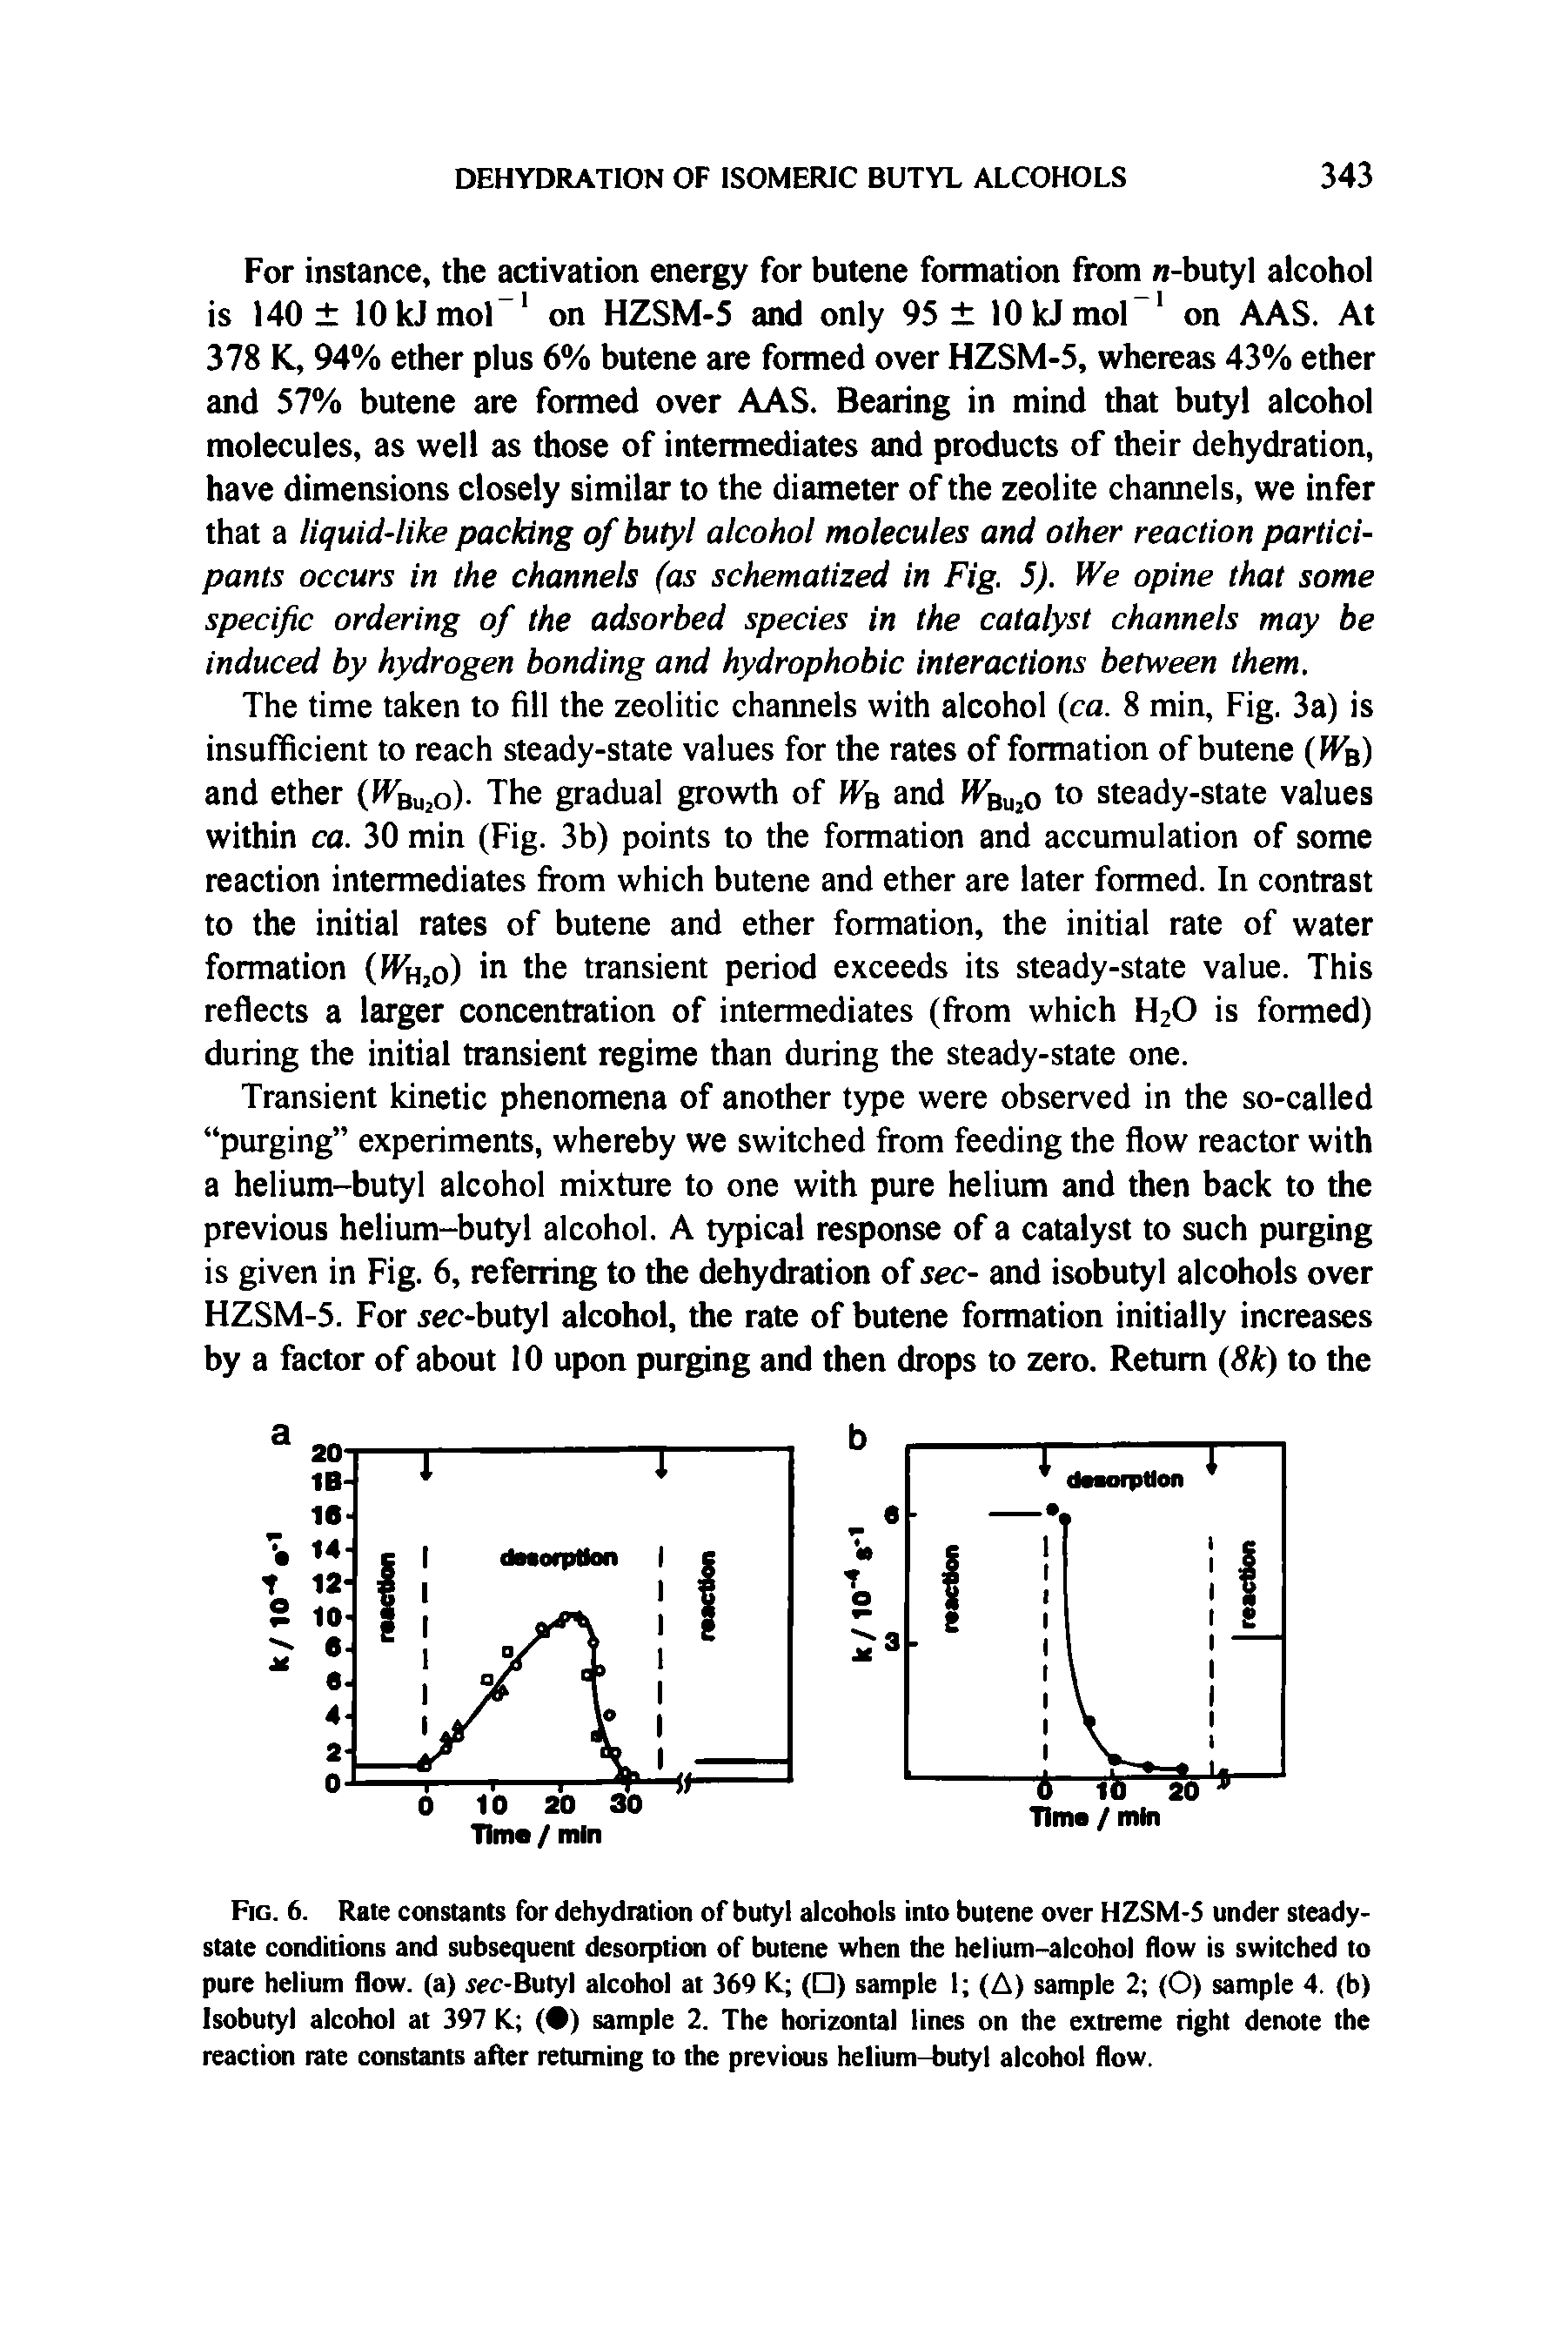 Fig. 6. Rate constants for dehydration of butyl alcohols into butene over HZSM-5 under steady-state conditions and subsequent desorption of butene when the helium-alcohol flow is switched to pure helium flow, (a) rec-Butyl alcohol at 369 K ( ) sample I (A) sample 2 (O) sample 4. (b) Isobutyl alcohol at 397 K ( ) sample 2. The horizontal lines on the extreme right denote the reaction rate constants after returning to the previous helium-butyl alcohol flow.